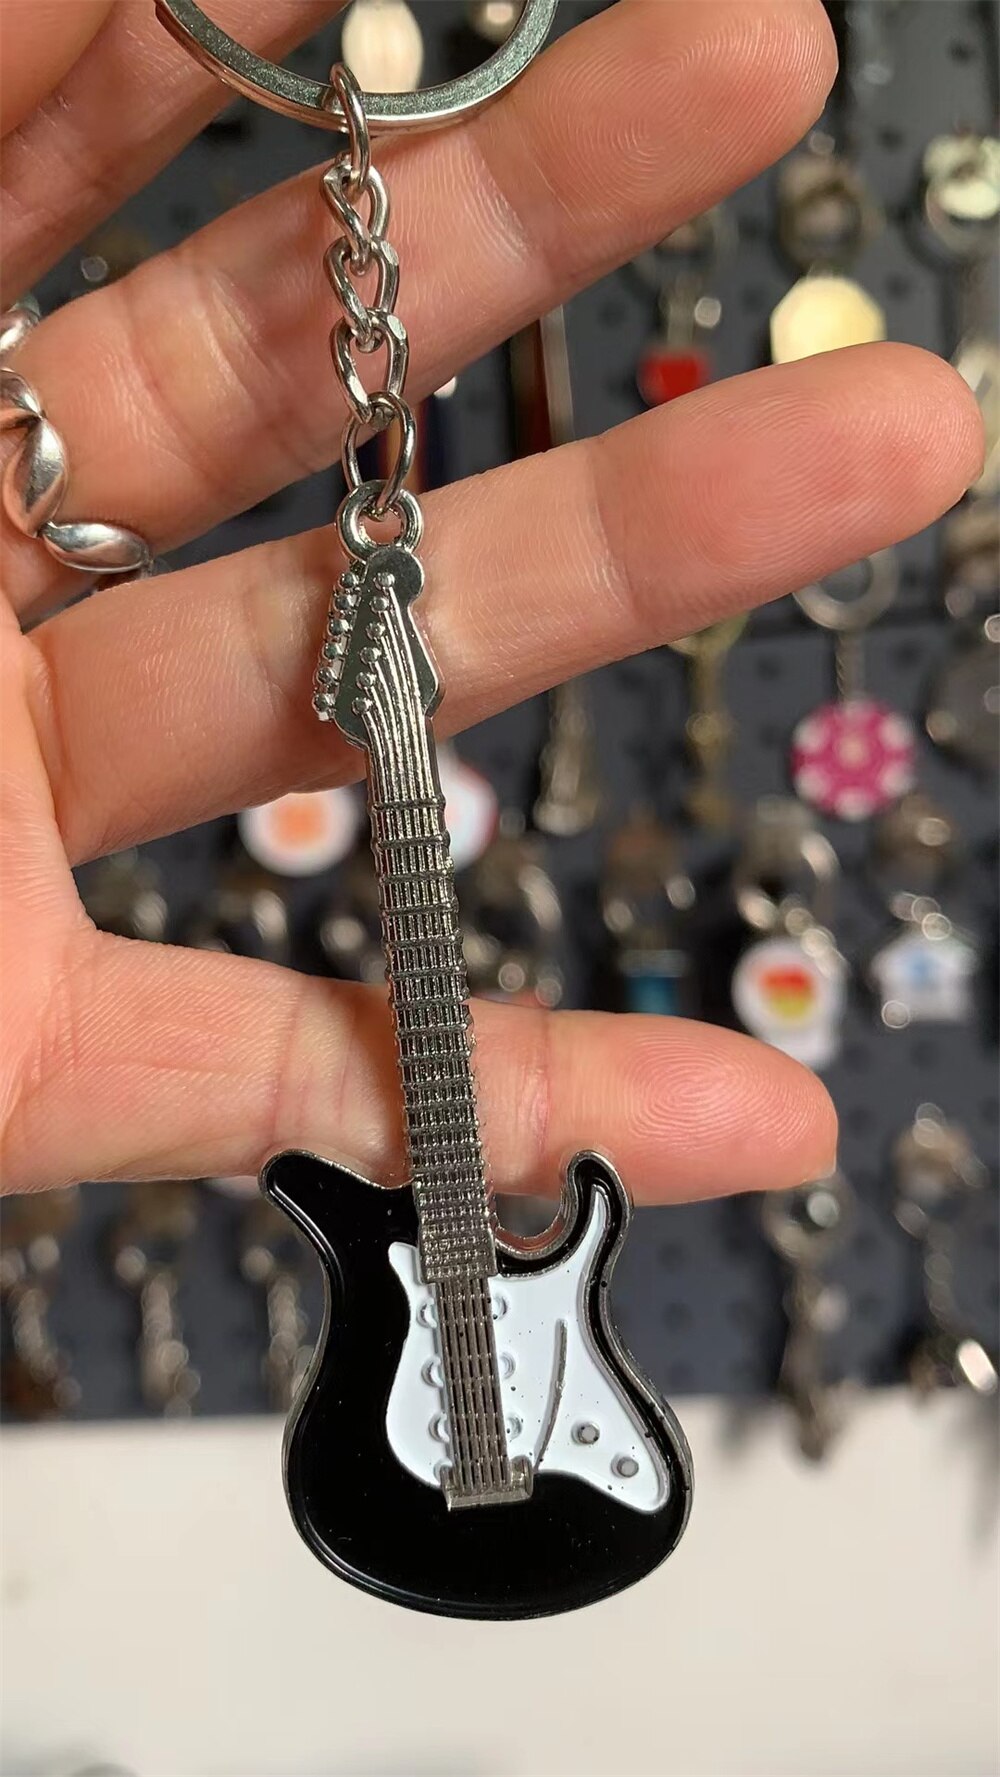 Guitar Key chain Metal 6 colour KeyChain Cute Musical Car Key Ring Silver Color pendant For Man Women Party Gift